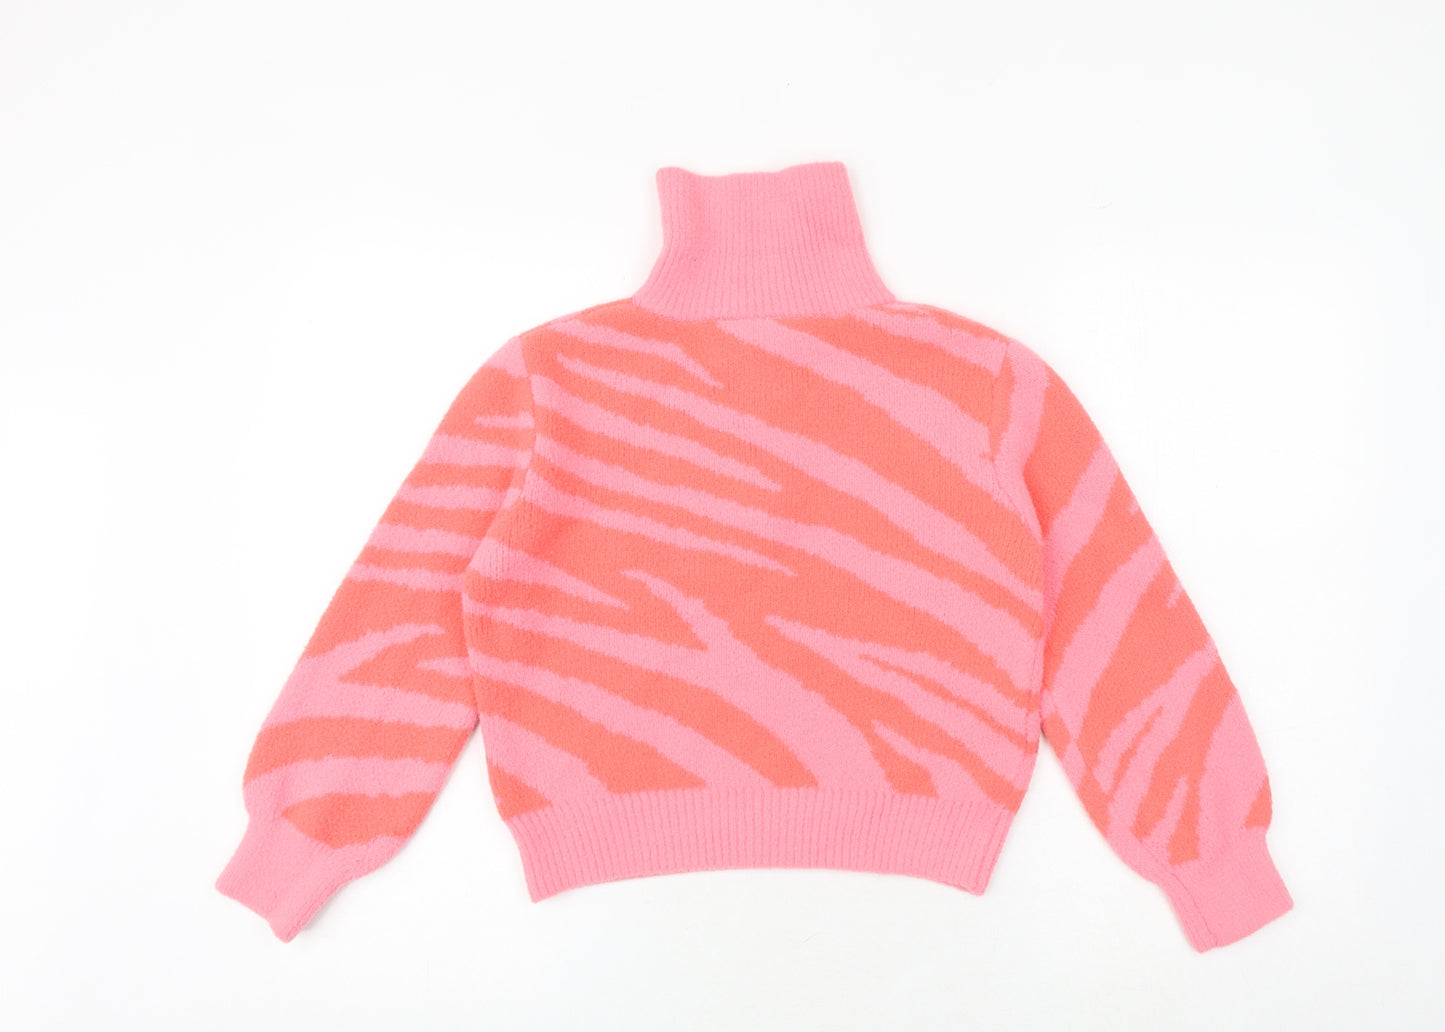 Marks and Spencer Girls Pink Roll Neck Animal Print Polyester Pullover Jumper Size 9-10 Years Zip - Zebra Print